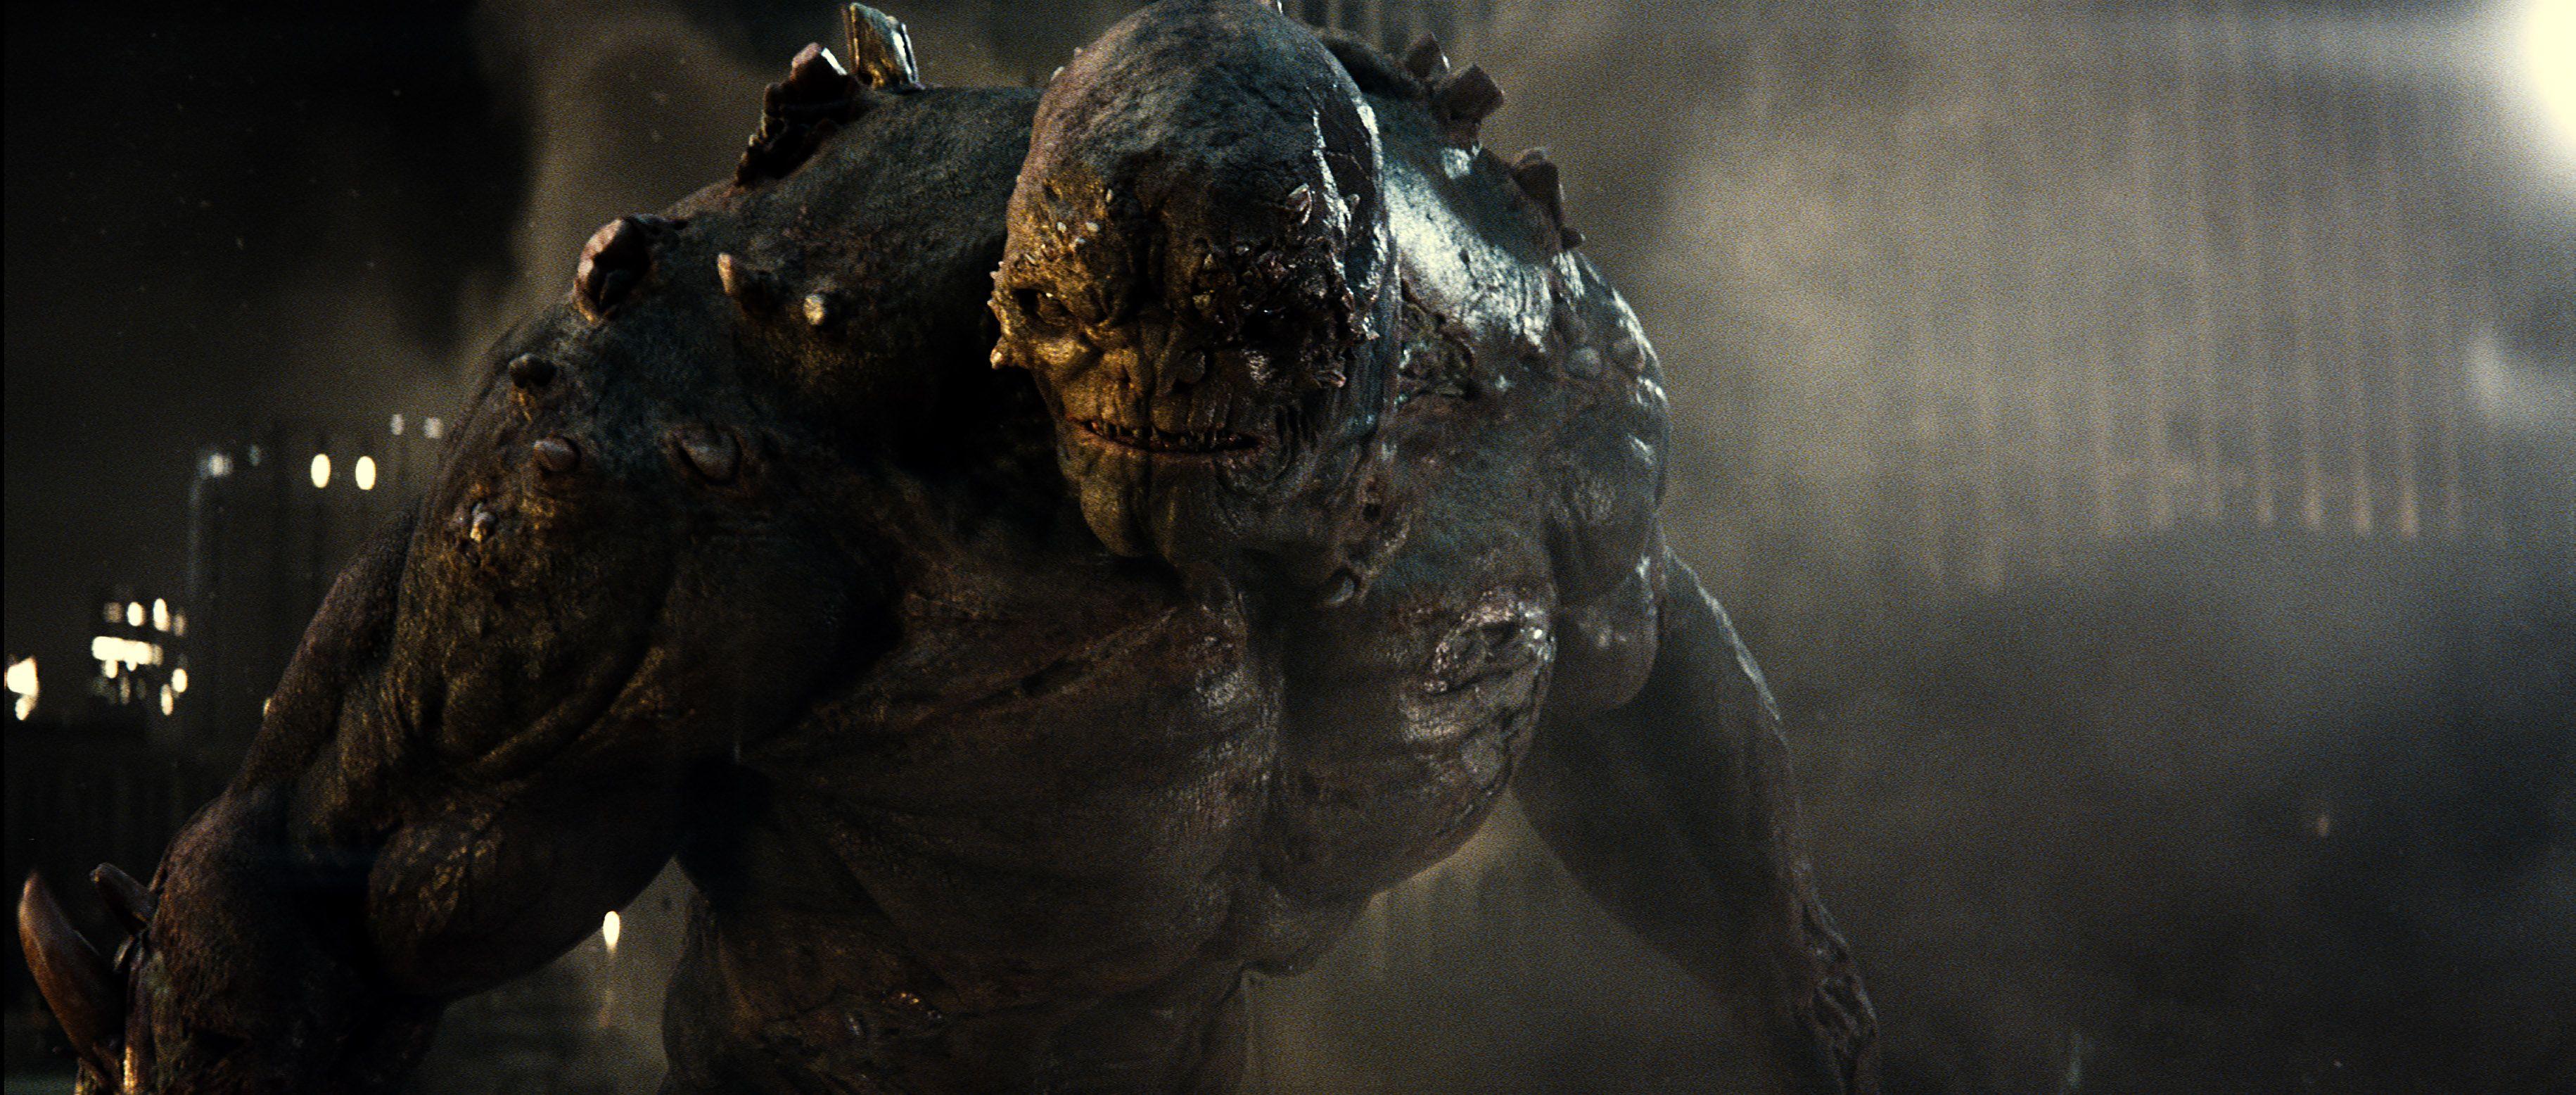 Enter Doomsday Full HD Wallpaper and Background Imagex1556